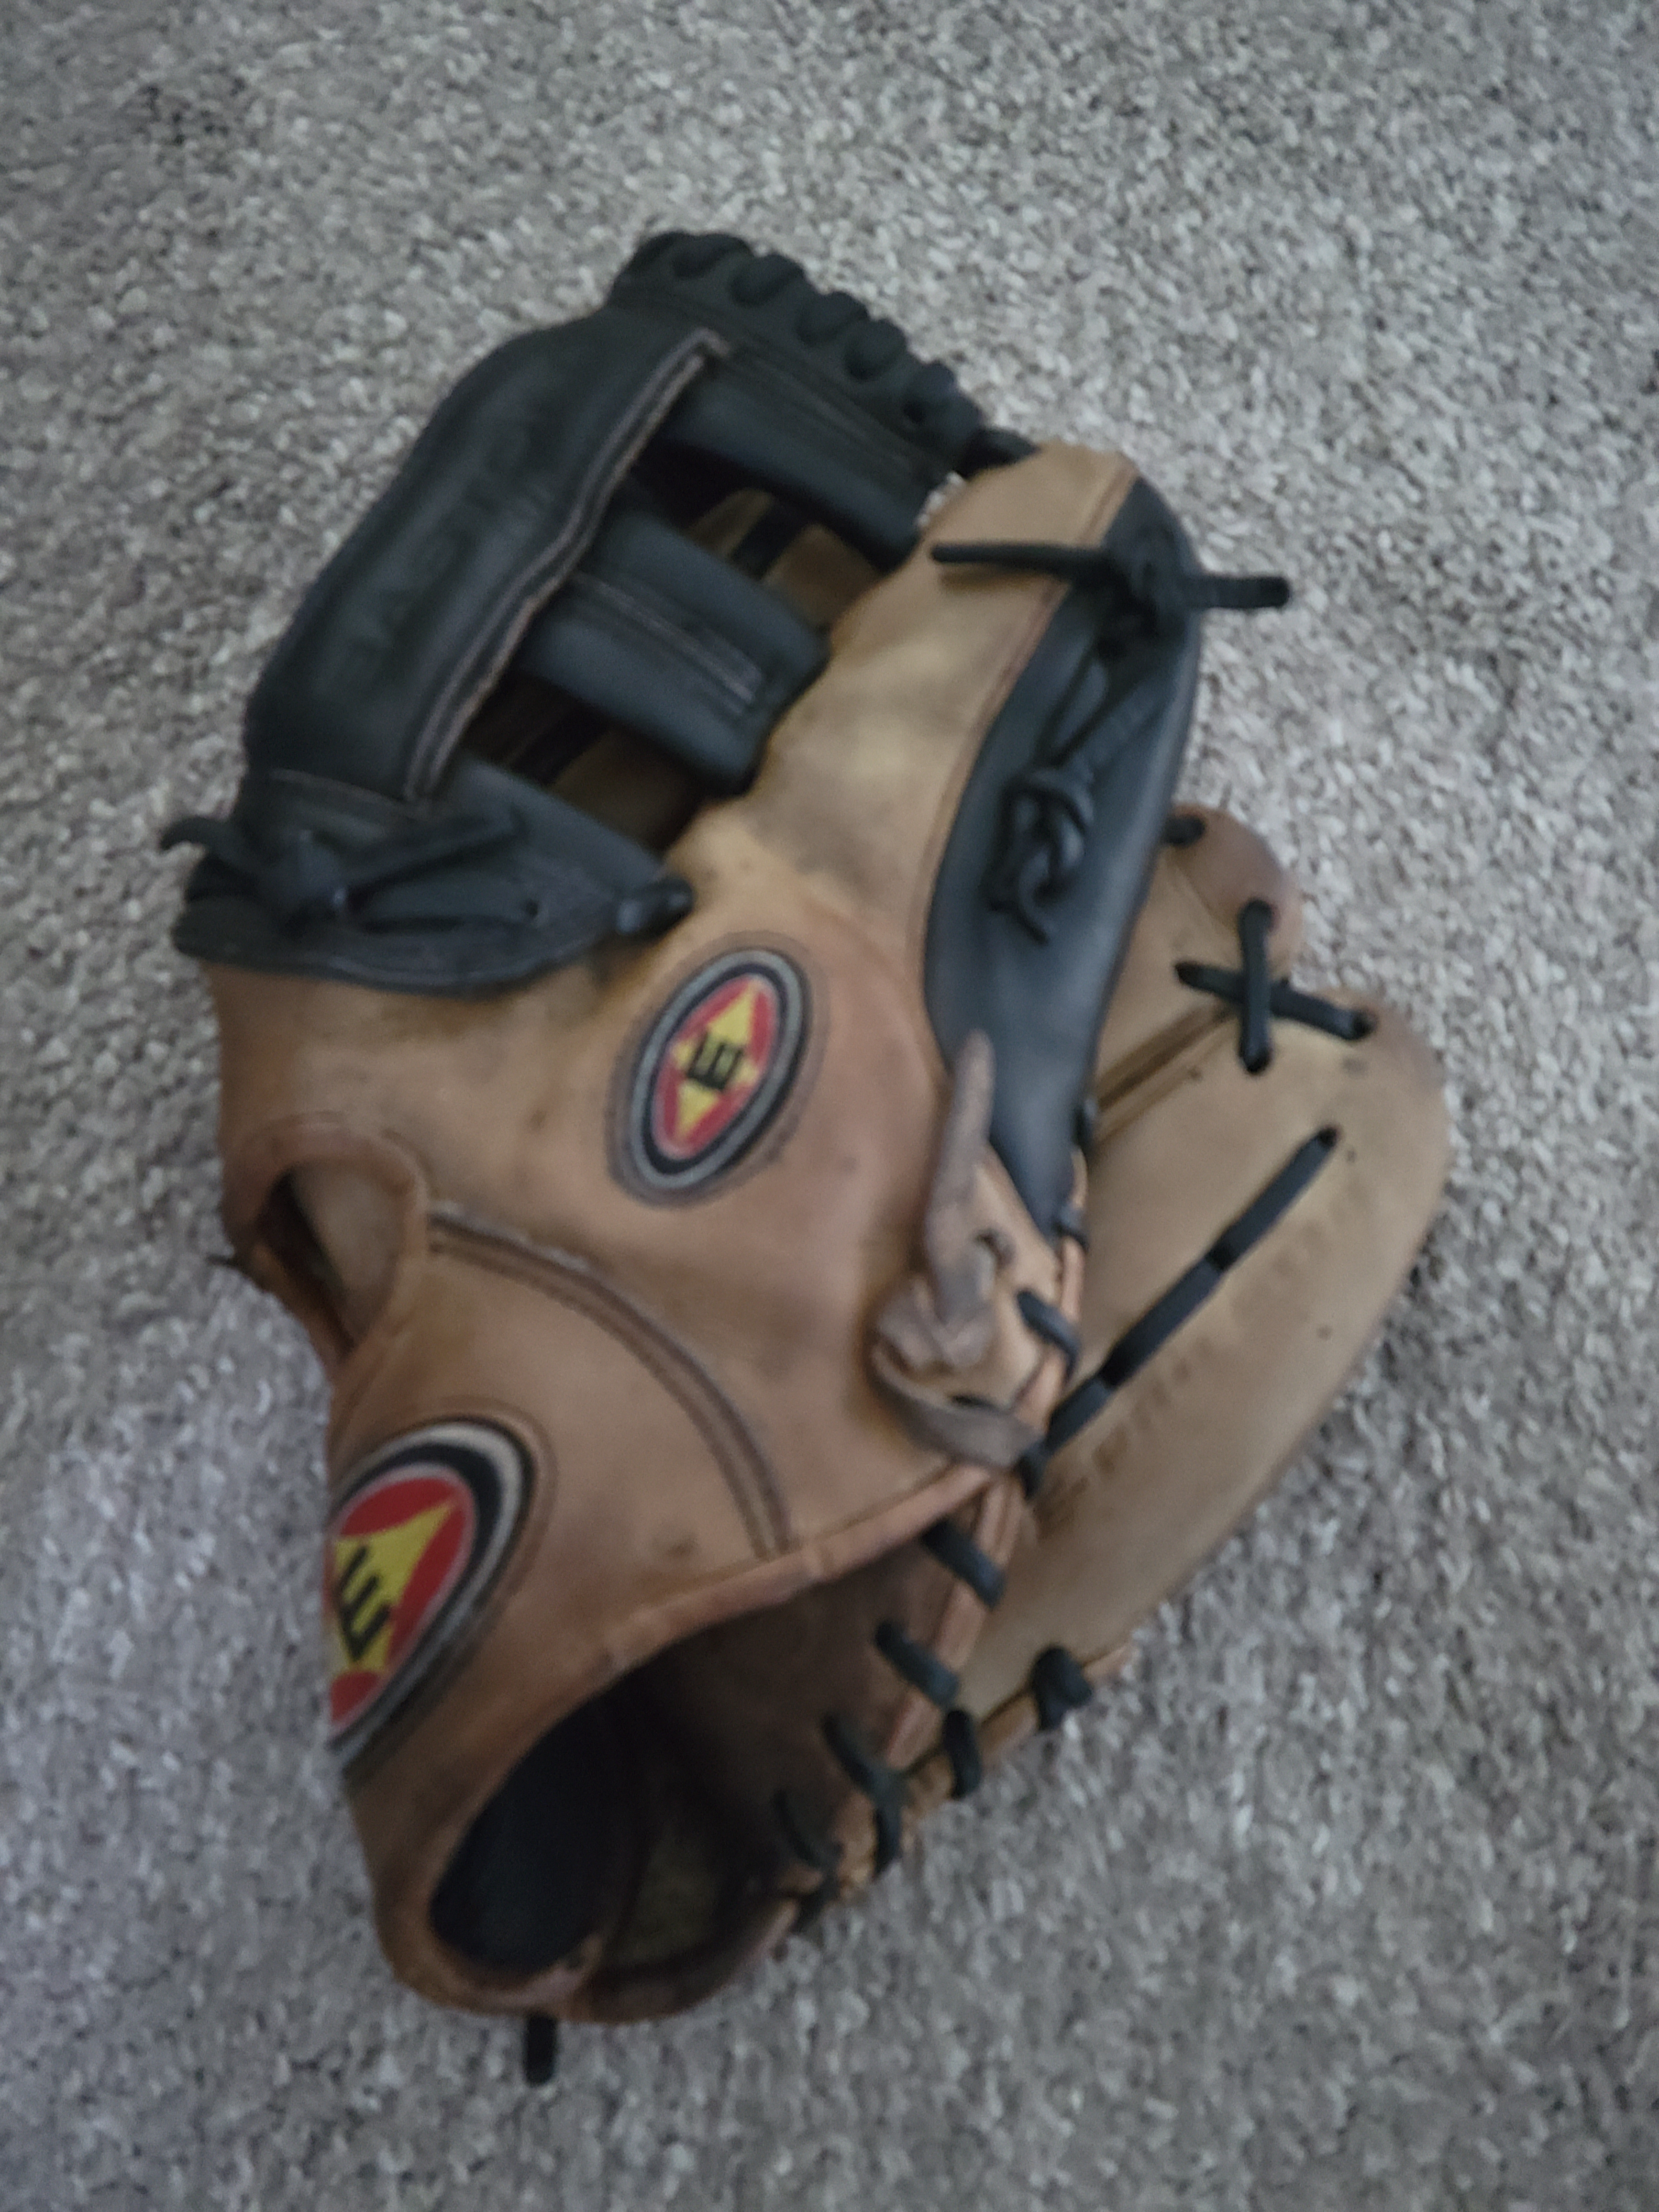 Used 2015 Easton Right Hand Throw Infield Professional Series Baseball Glove 11.5"